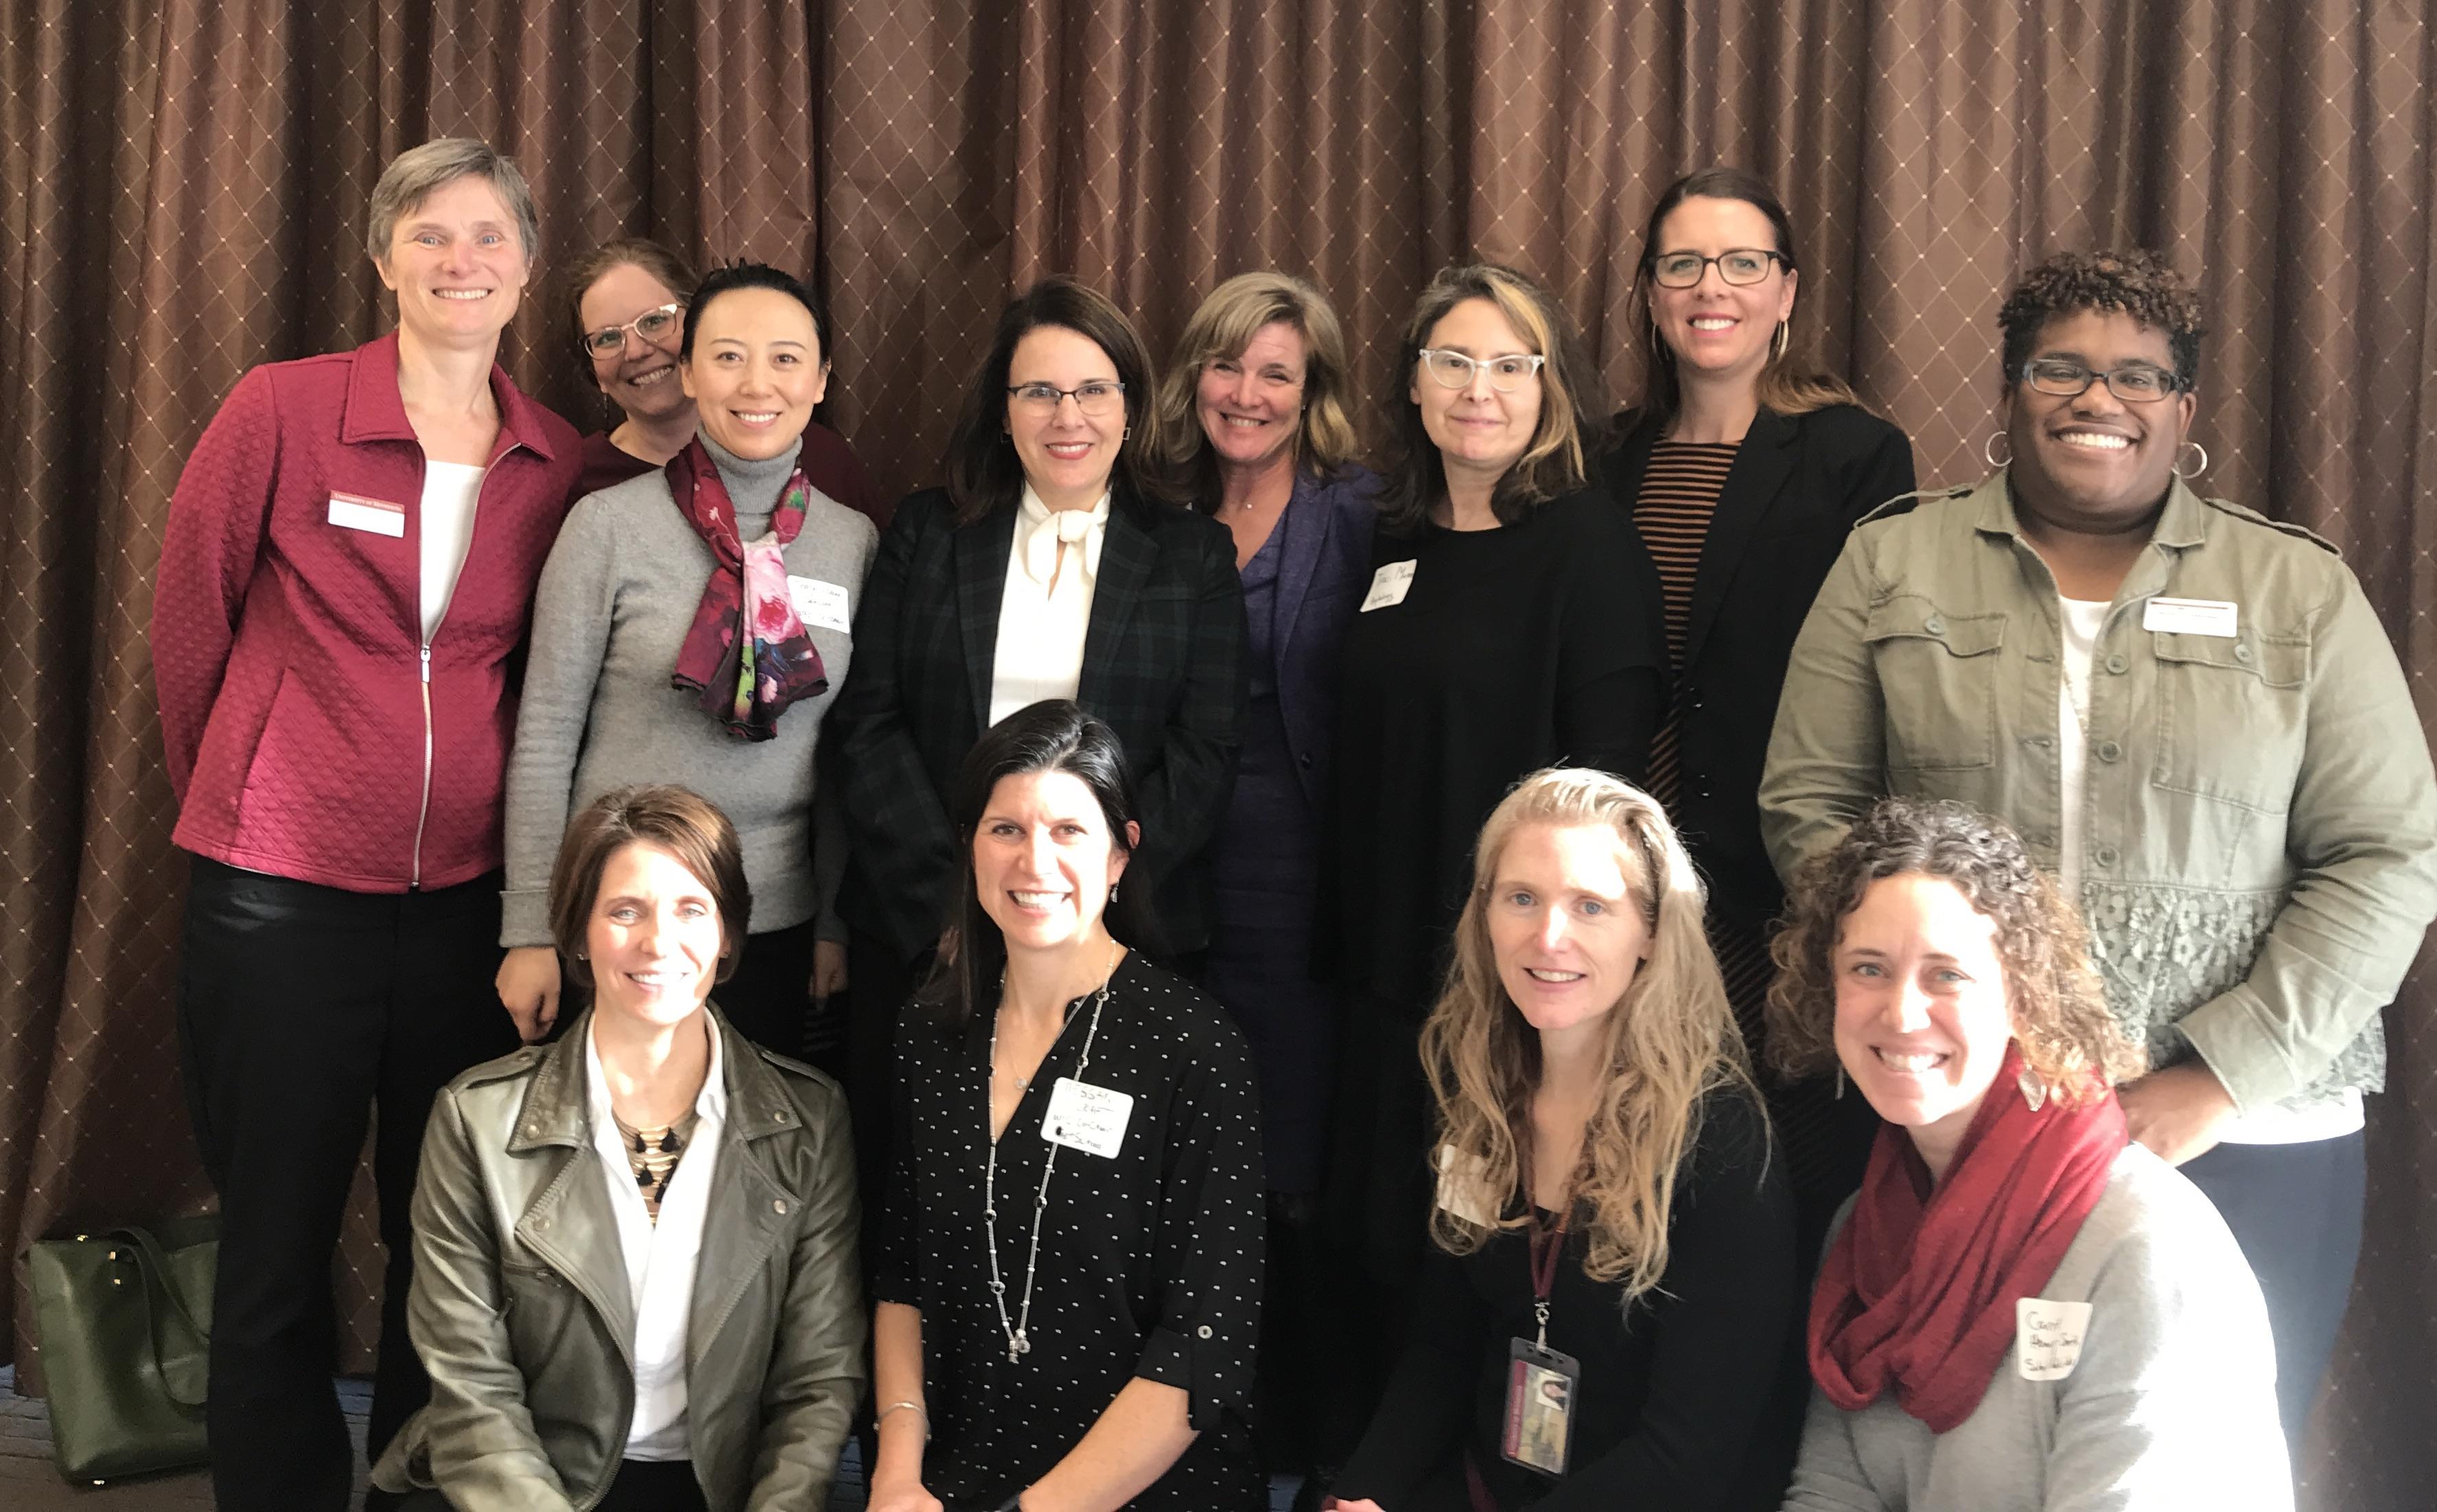 The 2019-2020 Women’s Faculty Cabinet and President Joan Gabel